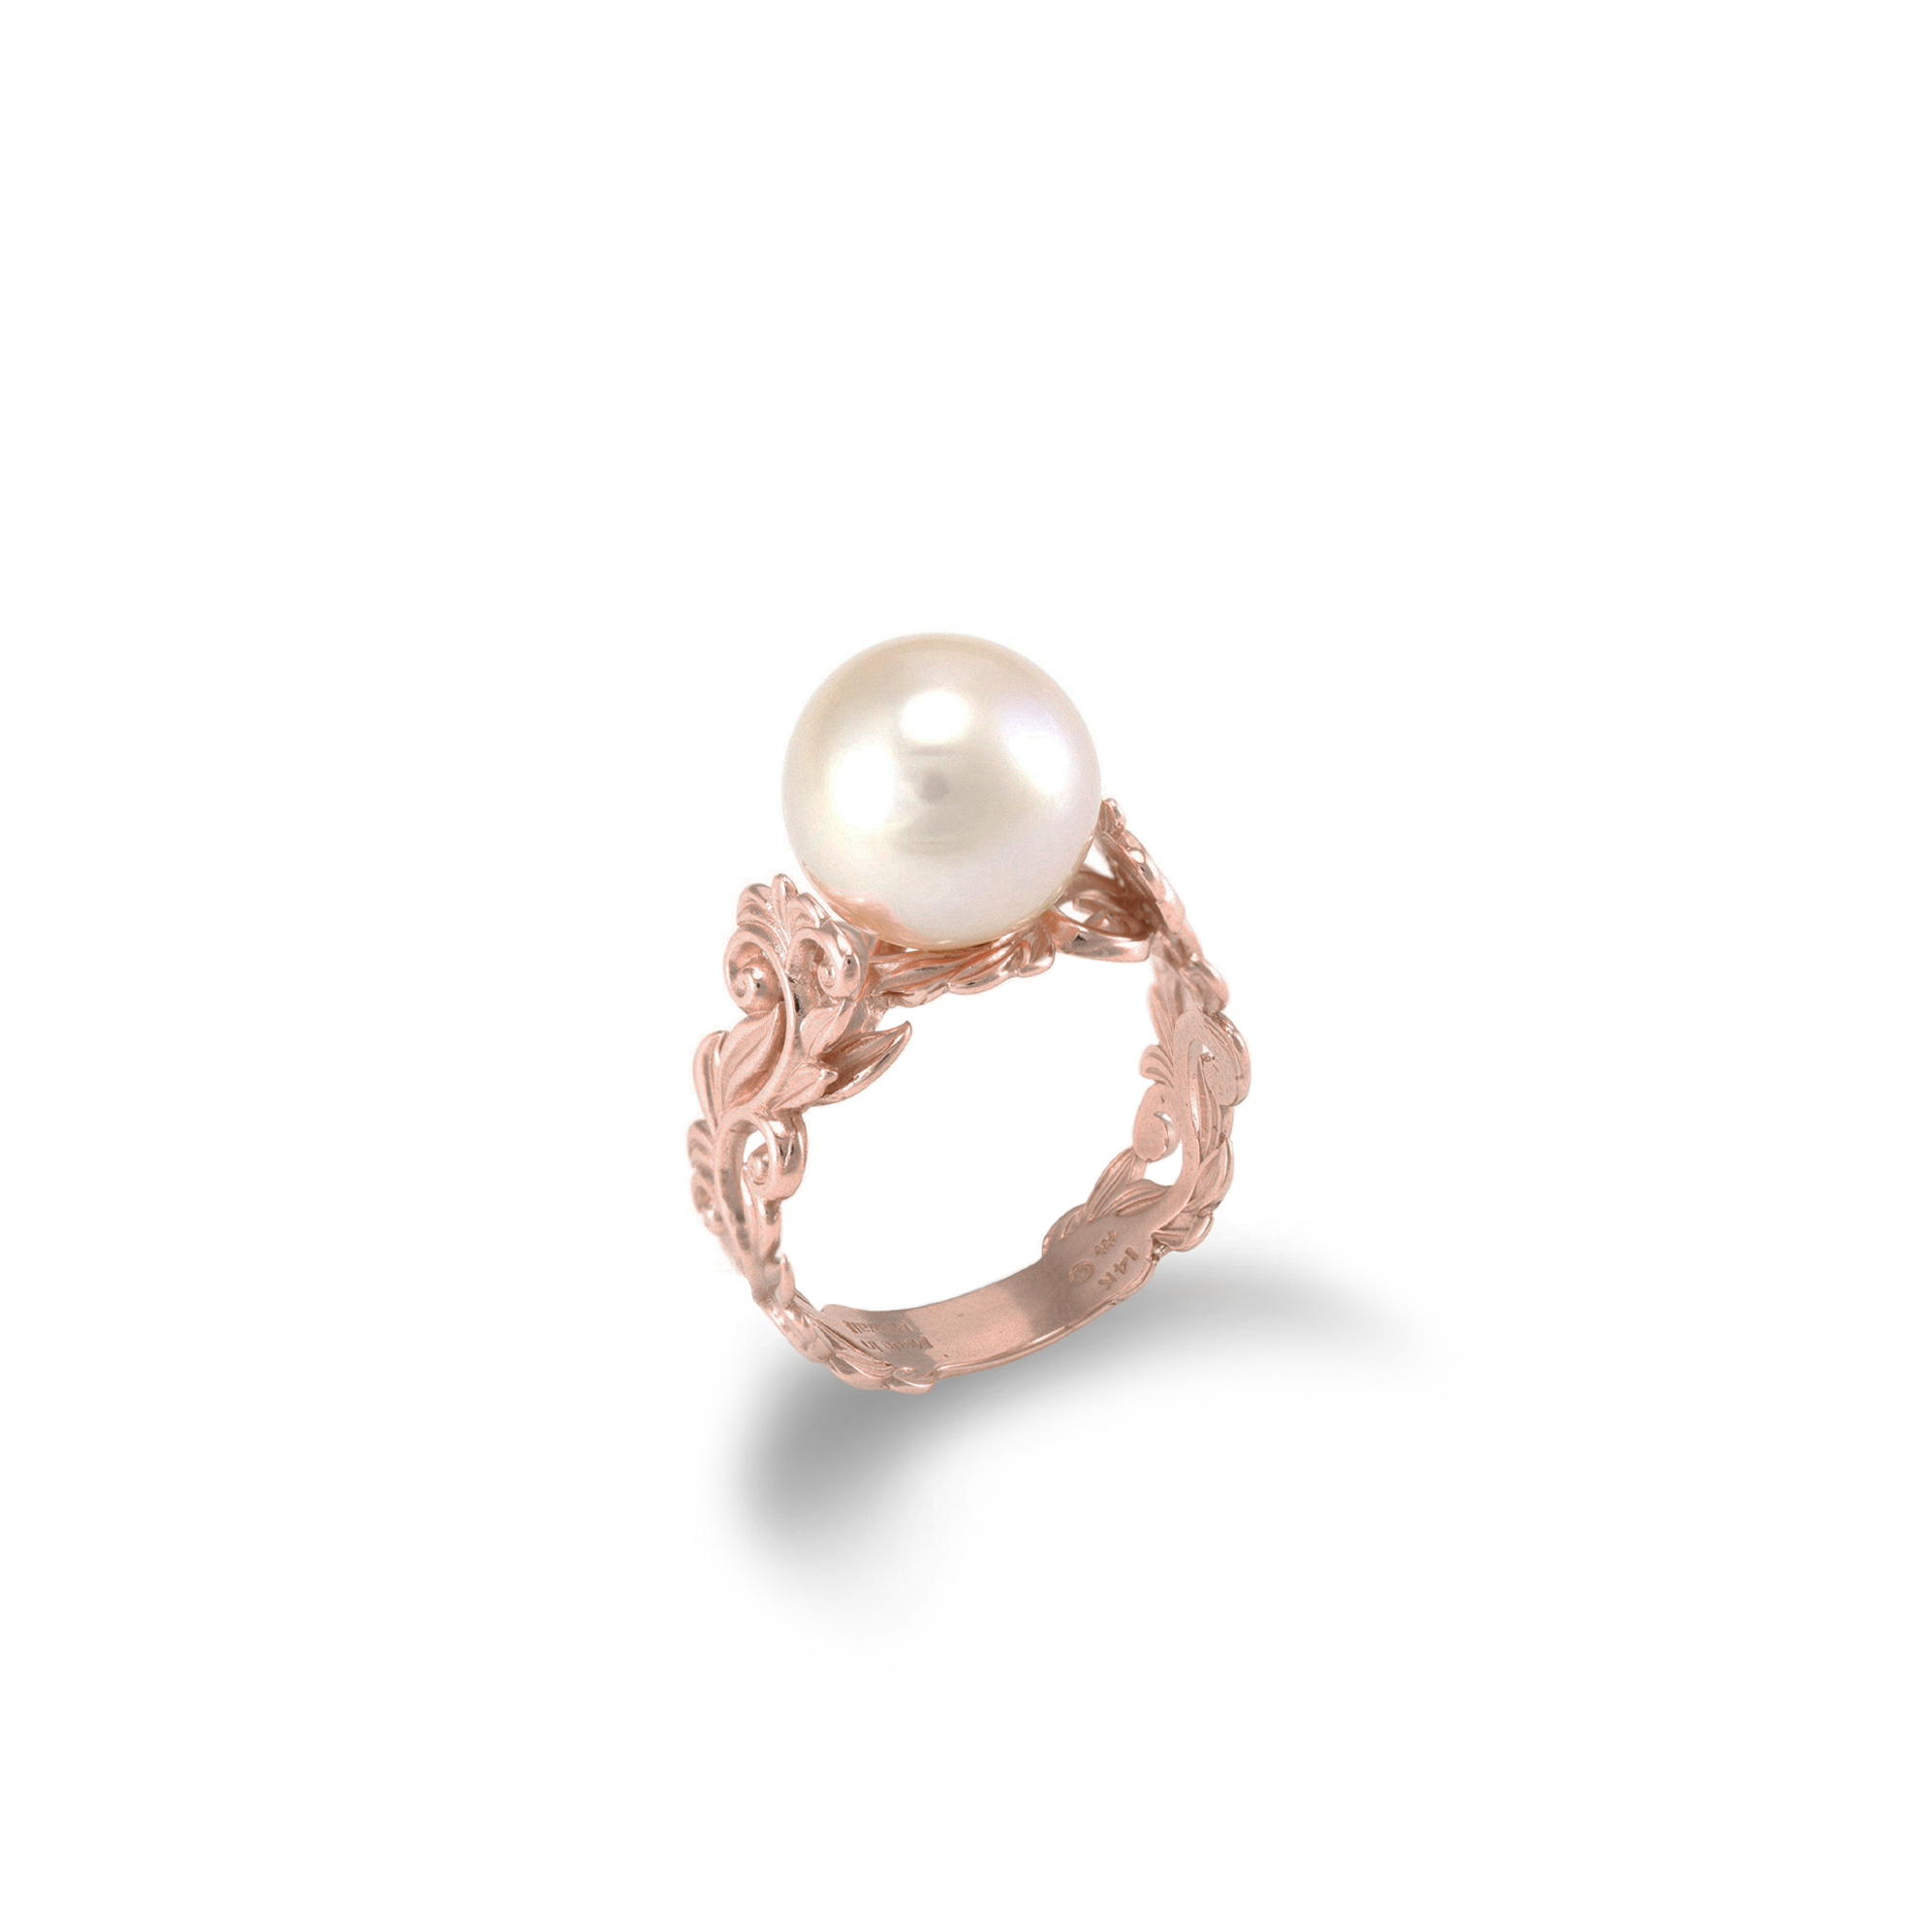 Living Heirloom Peach Freshwater Pearl Ring in Rose Gold - 10-11mm